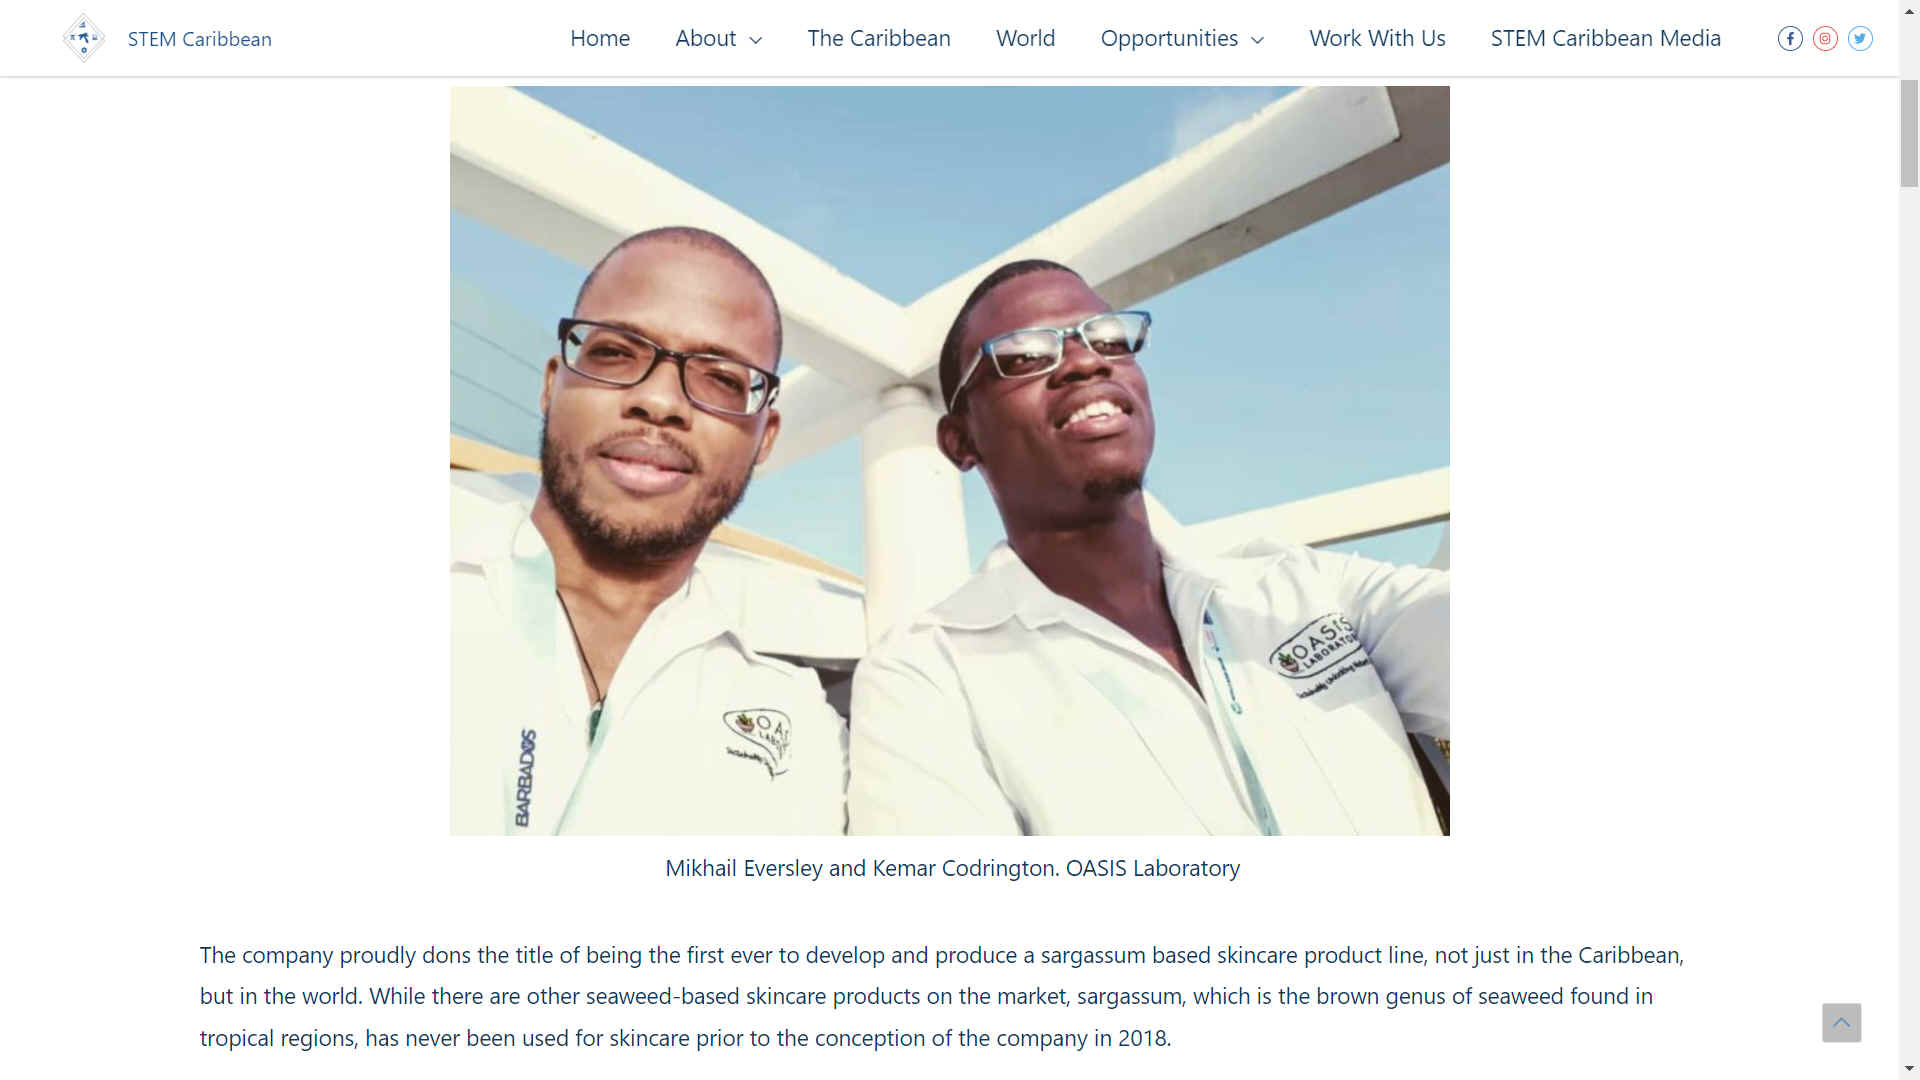 Oasis, Barbados skincare products made from sargassum, Mikhail Eversley and Kemar Codrington